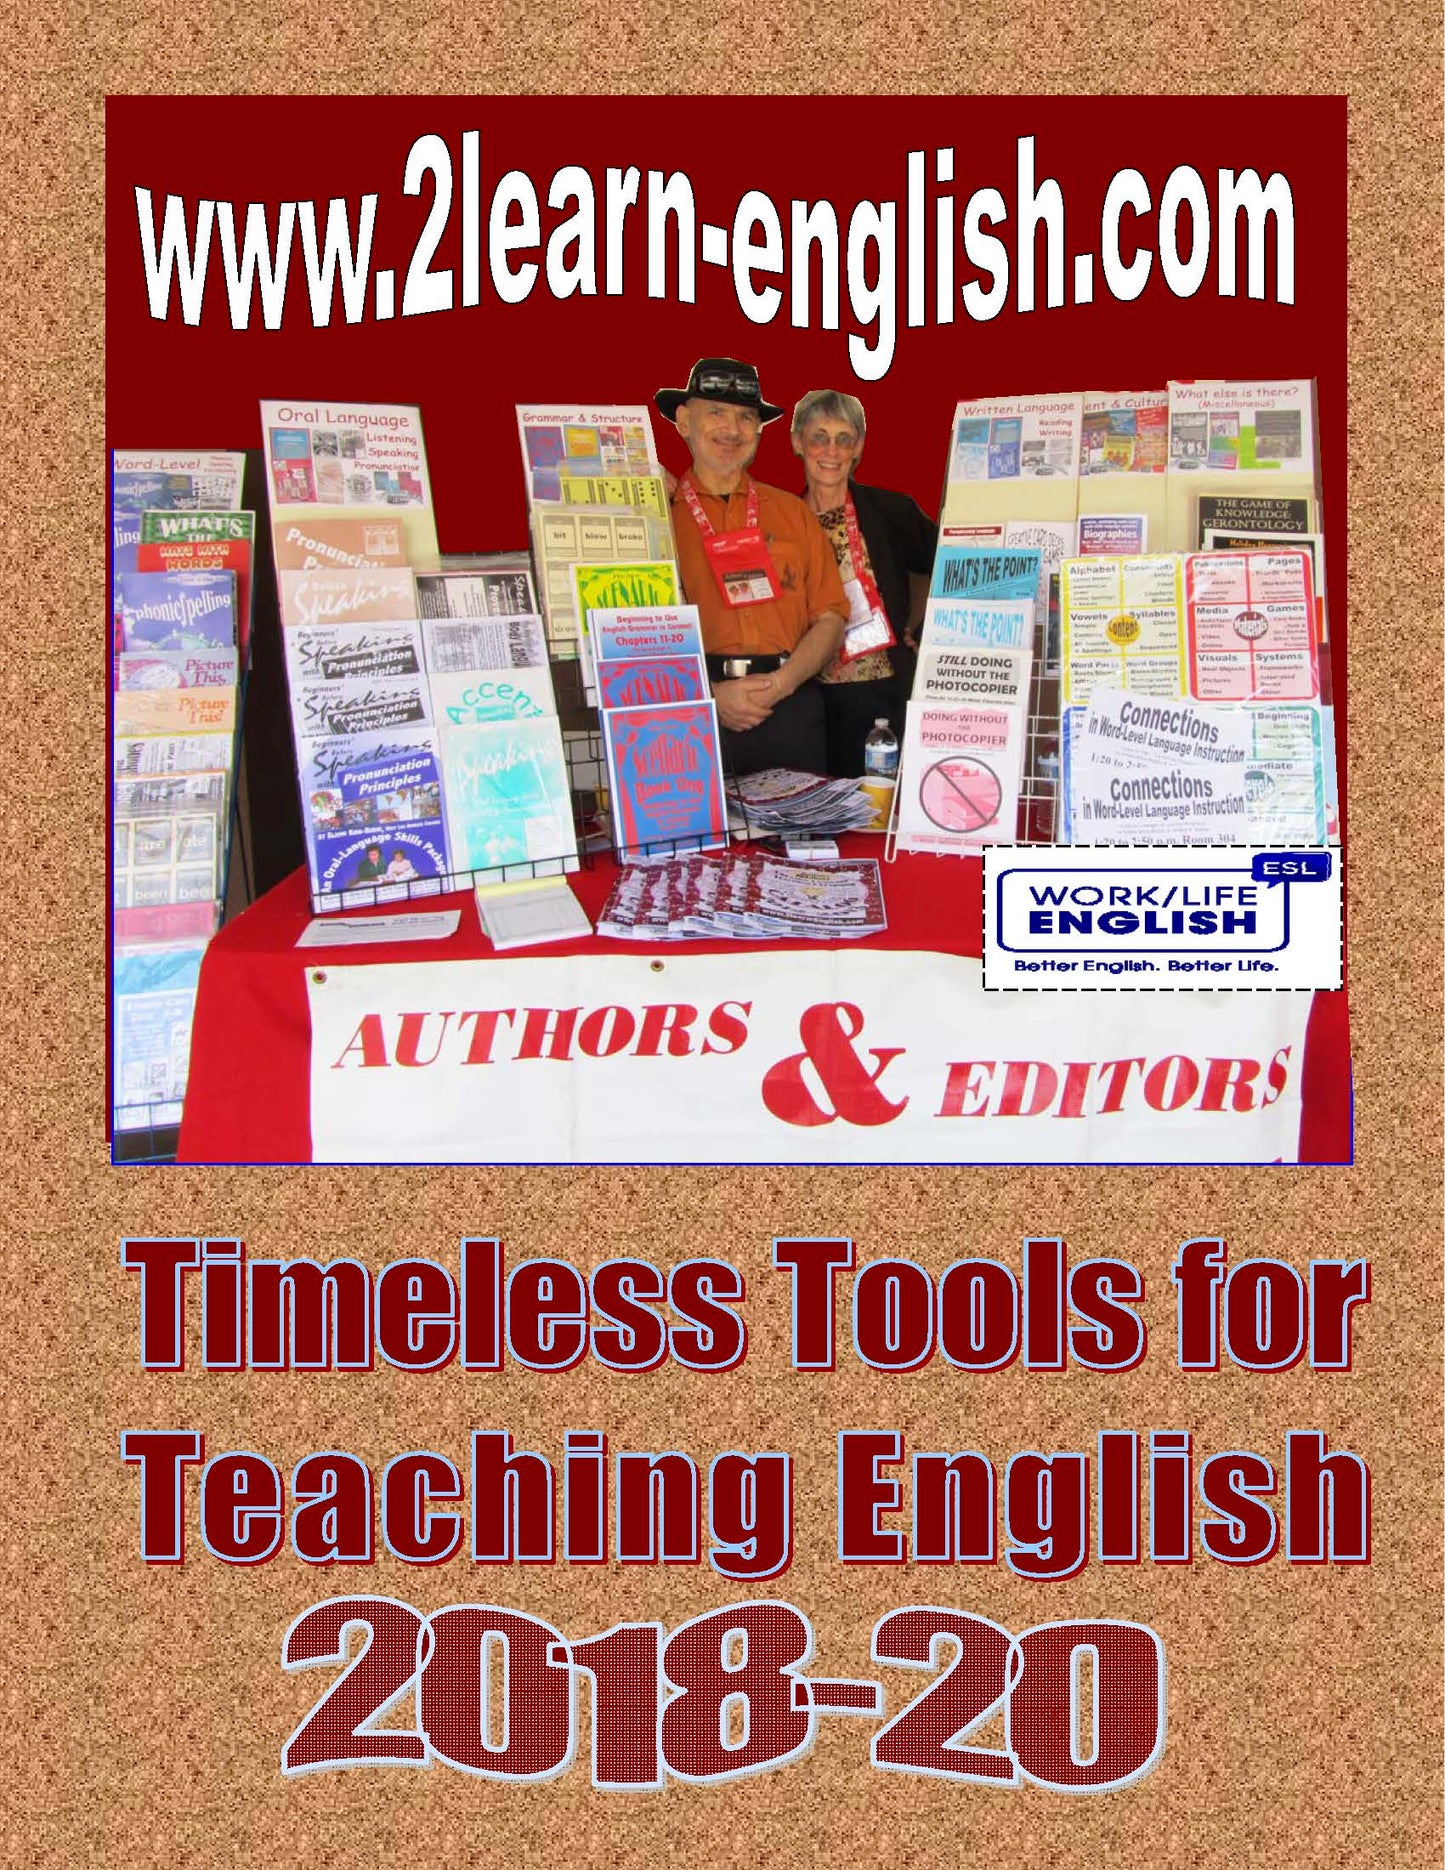 00 CATALOG OF TEACHING - LEARNING TOOLS